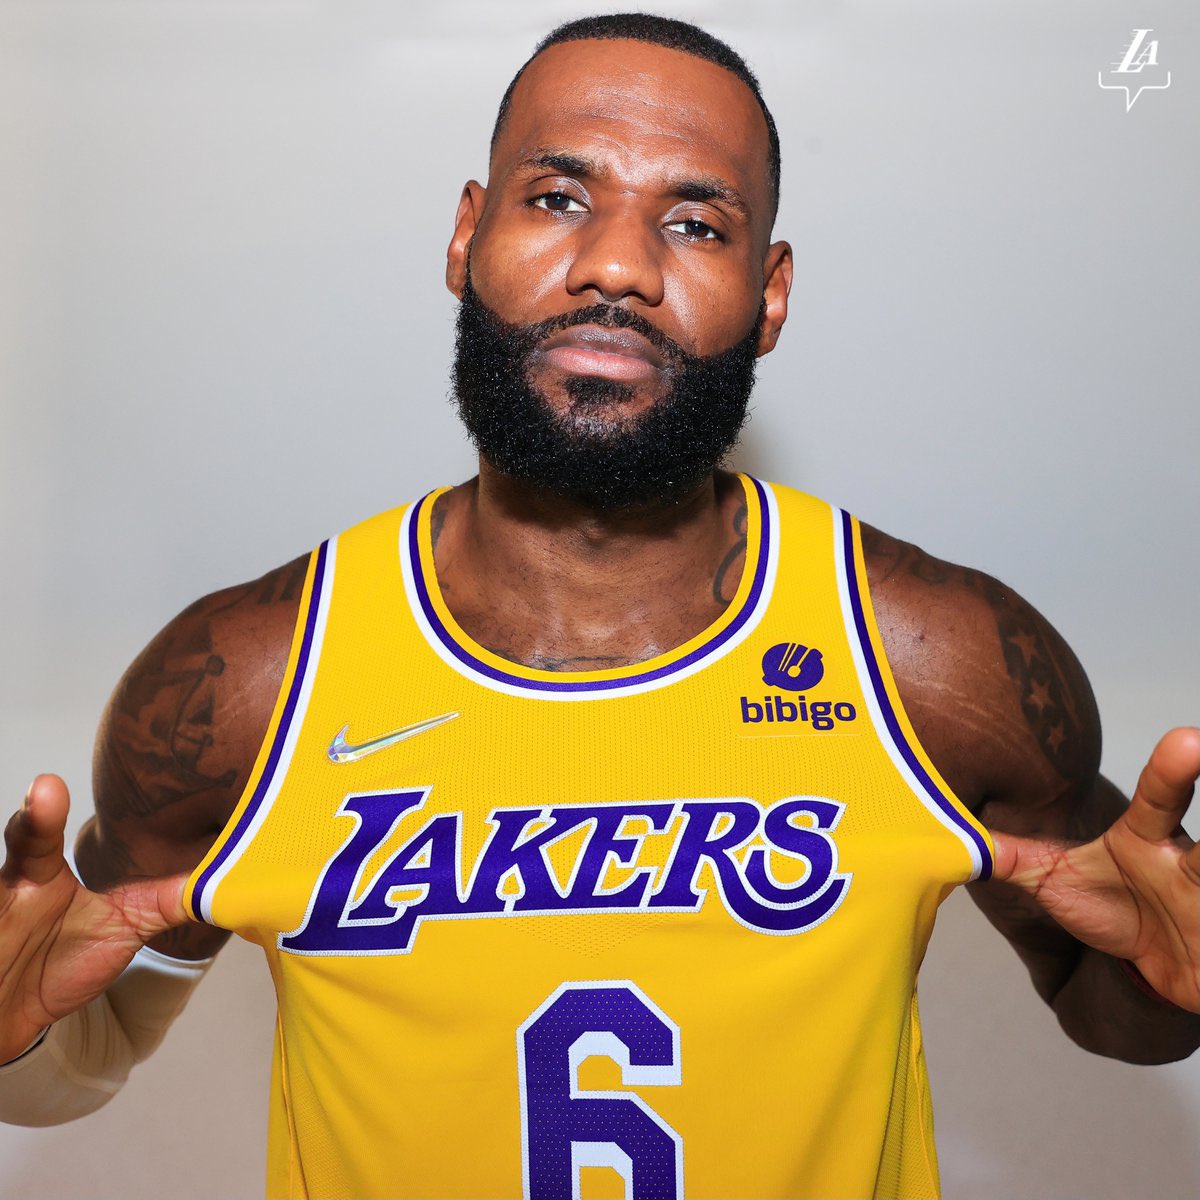 Strict marker Dictation Hoop Central on Twitter: "LeBron No. 6️⃣ jersey. 🔥 (via @Lakers)  https://t.co/MwxxpUWfxw" / Twitter